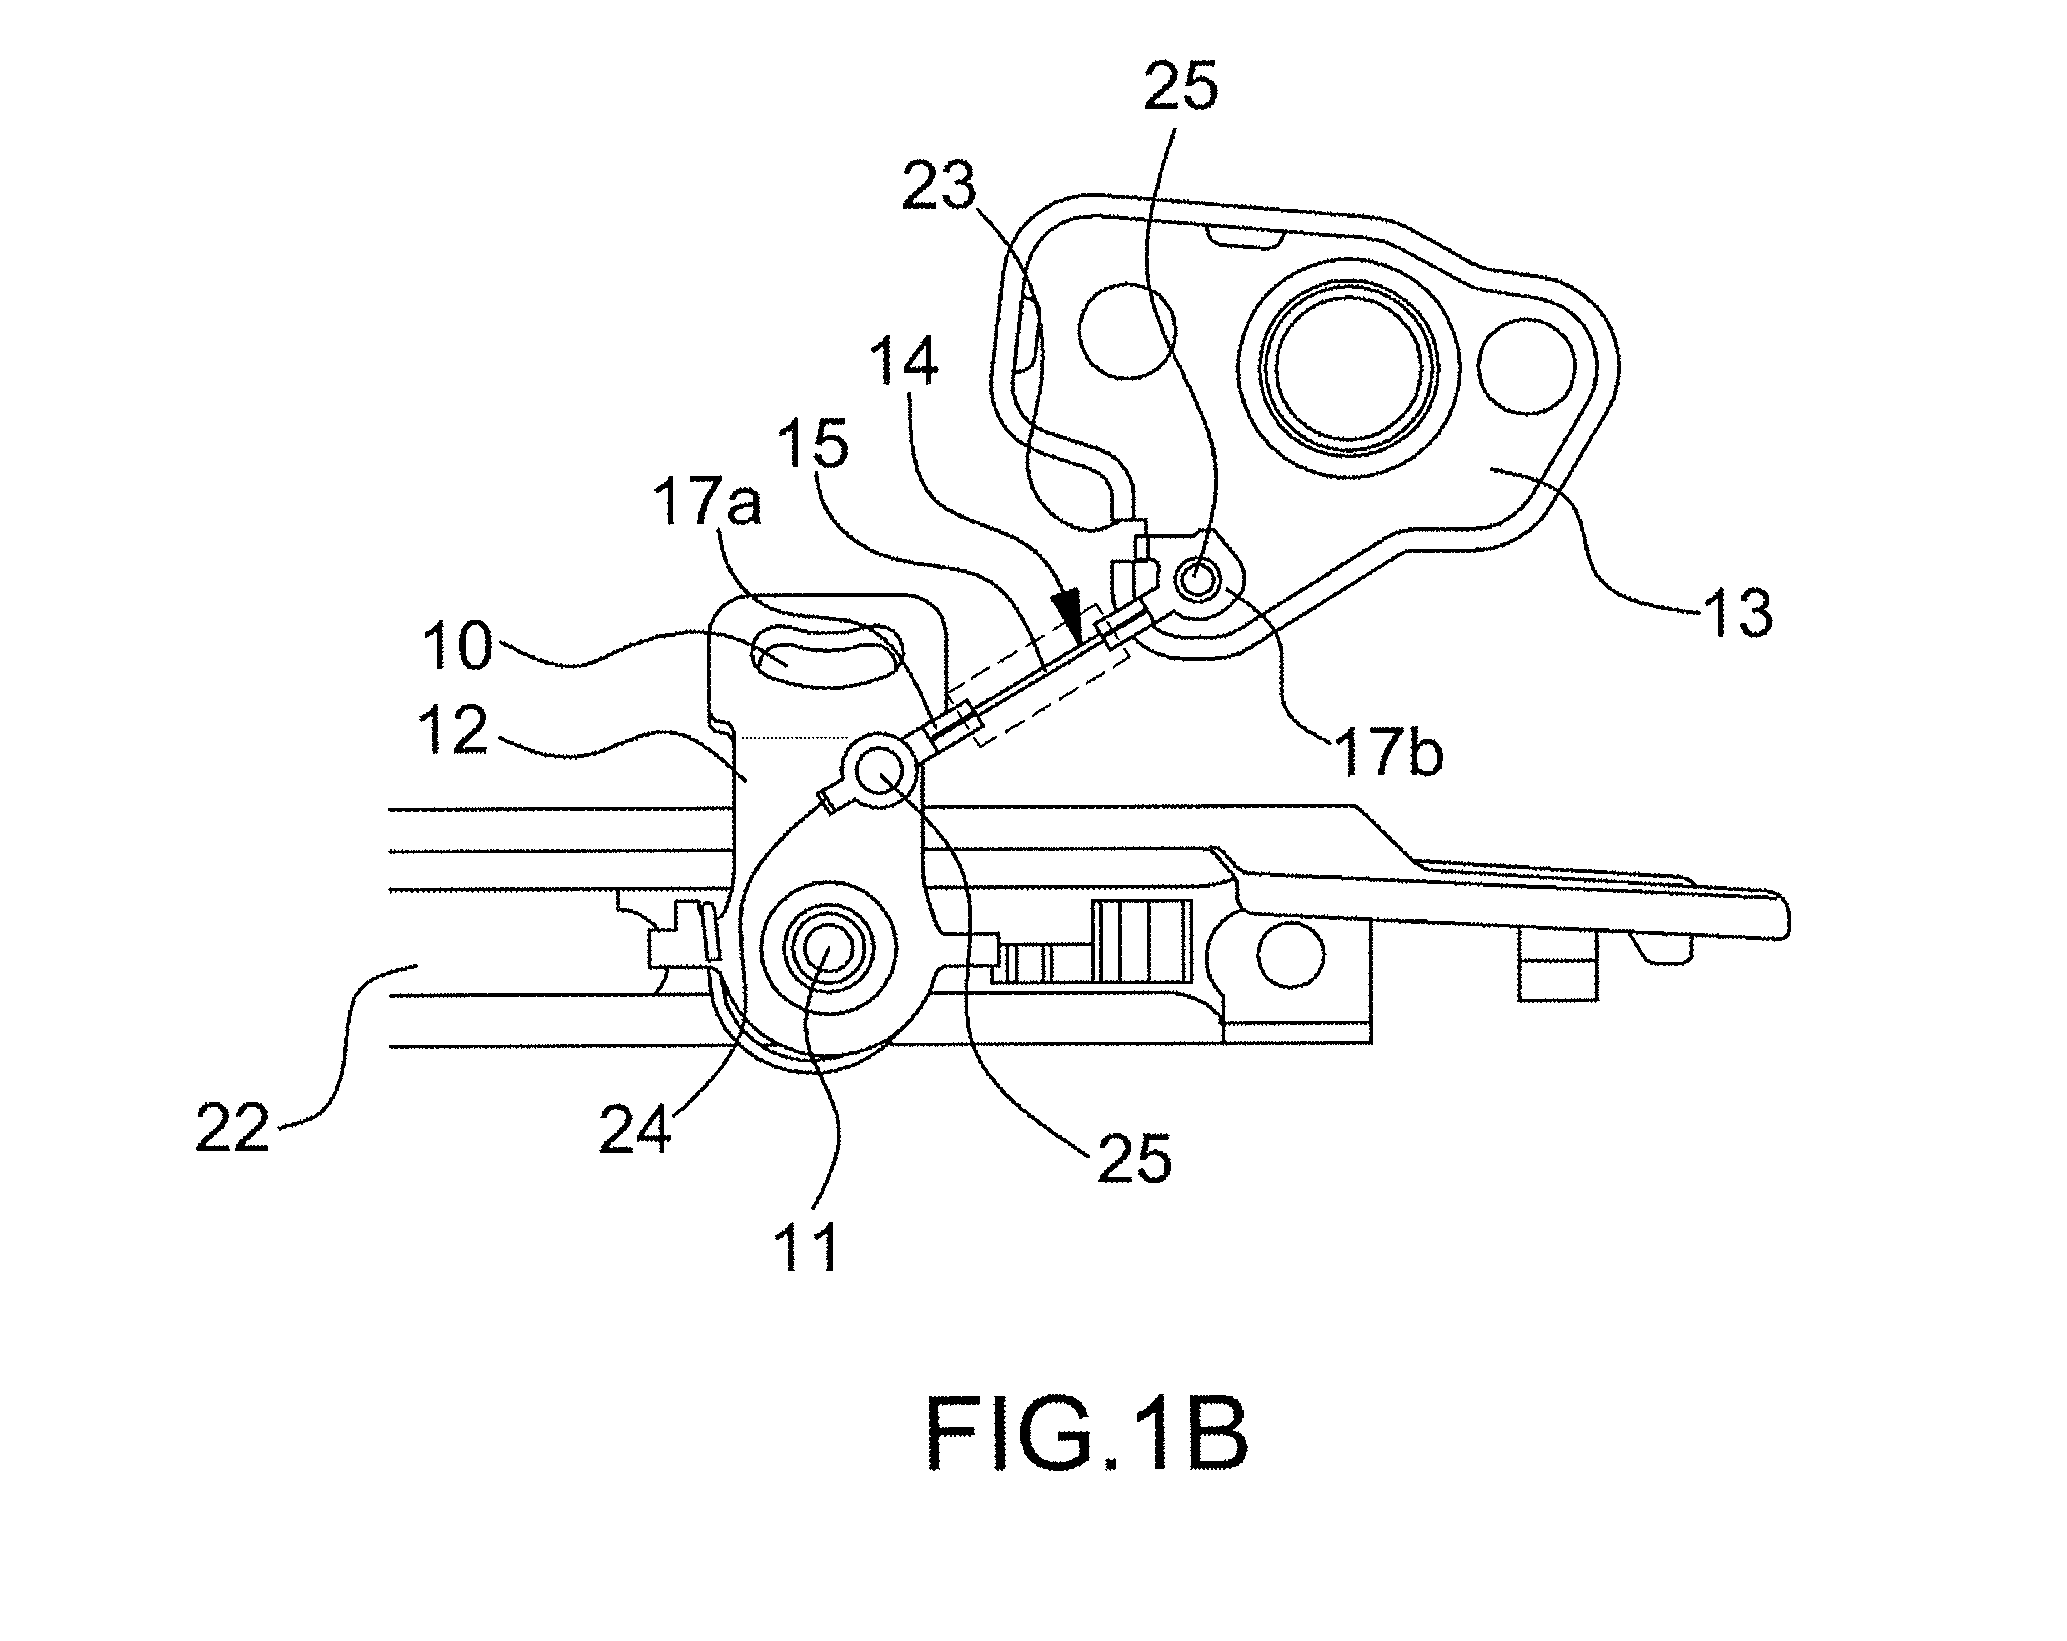 Buckle device for seat belt of vehicle